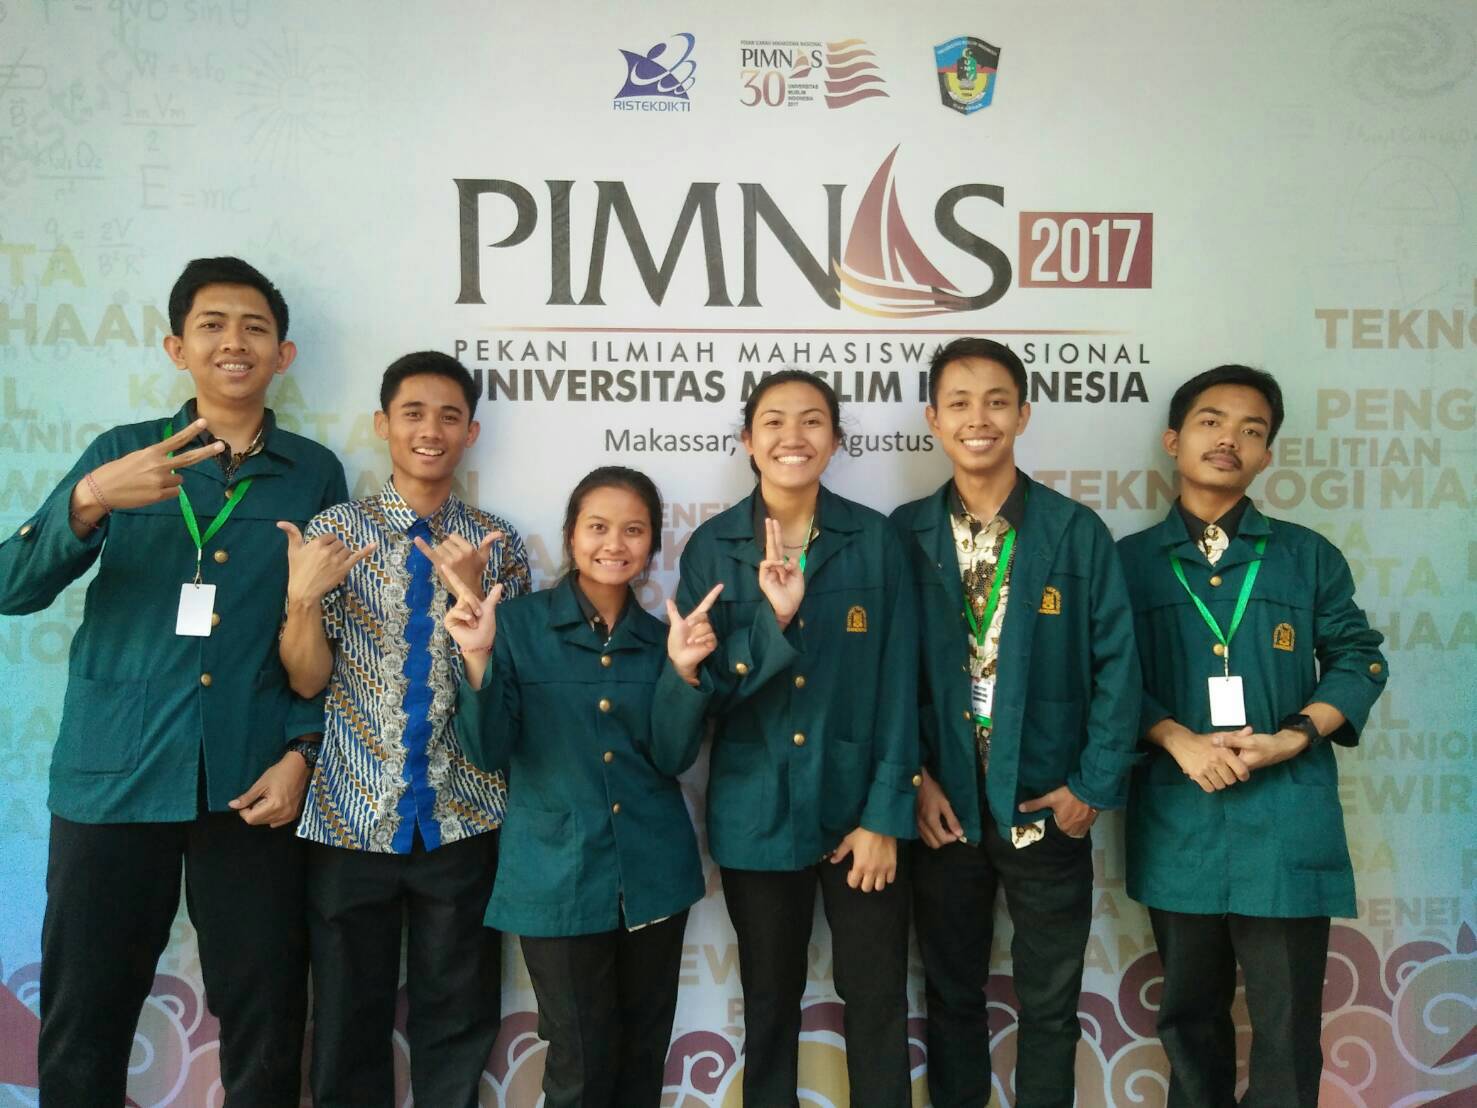 team-ortubis-shines-as-the-second-winner-of-pkm-m1-in-30th-pimnas